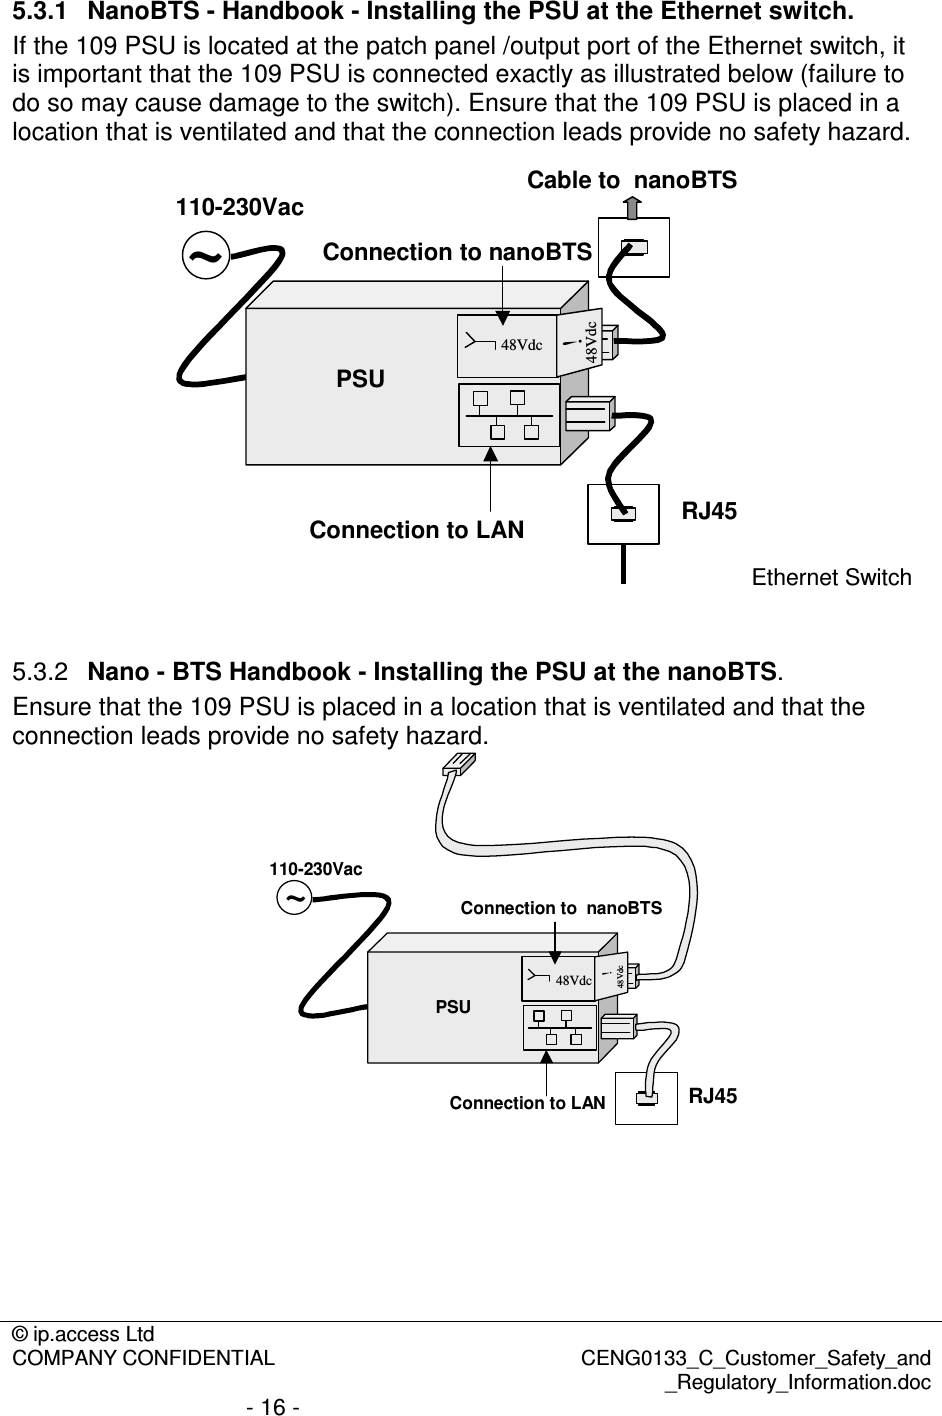 © ip.access Ltd  COMPANY CONFIDENTIAL  CENG0133_C_Customer_Safety_and _Regulatory_Information.doc - 16 -  5.3.1  NanoBTS - Handbook - Installing the PSU at the Ethernet switch. If the 109 PSU is located at the patch panel /output port of the Ethernet switch, it is important that the 109 PSU is connected exactly as illustrated below (failure to do so may cause damage to the switch). Ensure that the 109 PSU is placed in a location that is ventilated and that the connection leads provide no safety hazard. ~PSU48Vdc48Vdc!110-230VacRJ45Connection to LANConnection to nanoBTSCable to  nanoBTSEthernet Switch  5.3.2  Nano - BTS Handbook - Installing the PSU at the nanoBTS. Ensure that the 109 PSU is placed in a location that is ventilated and that the connection leads provide no safety hazard. RJ45Connection to LAN~PSU48Vdc48Vdc!110-230VacConnection to  nanoBTS      